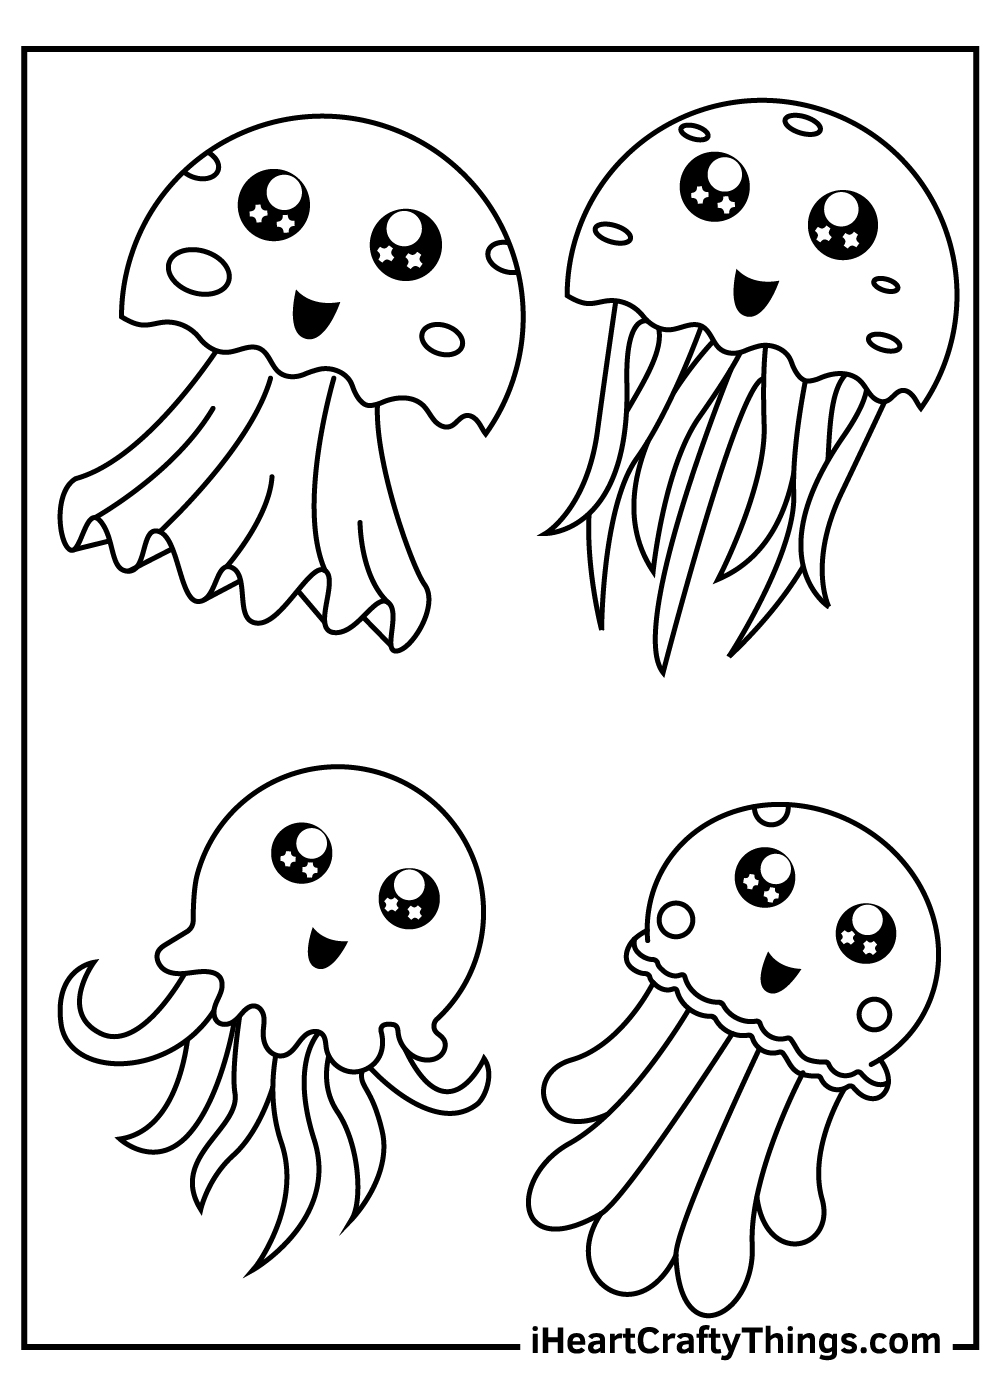 Jellyfish Coloring Pages (Updated 2021)